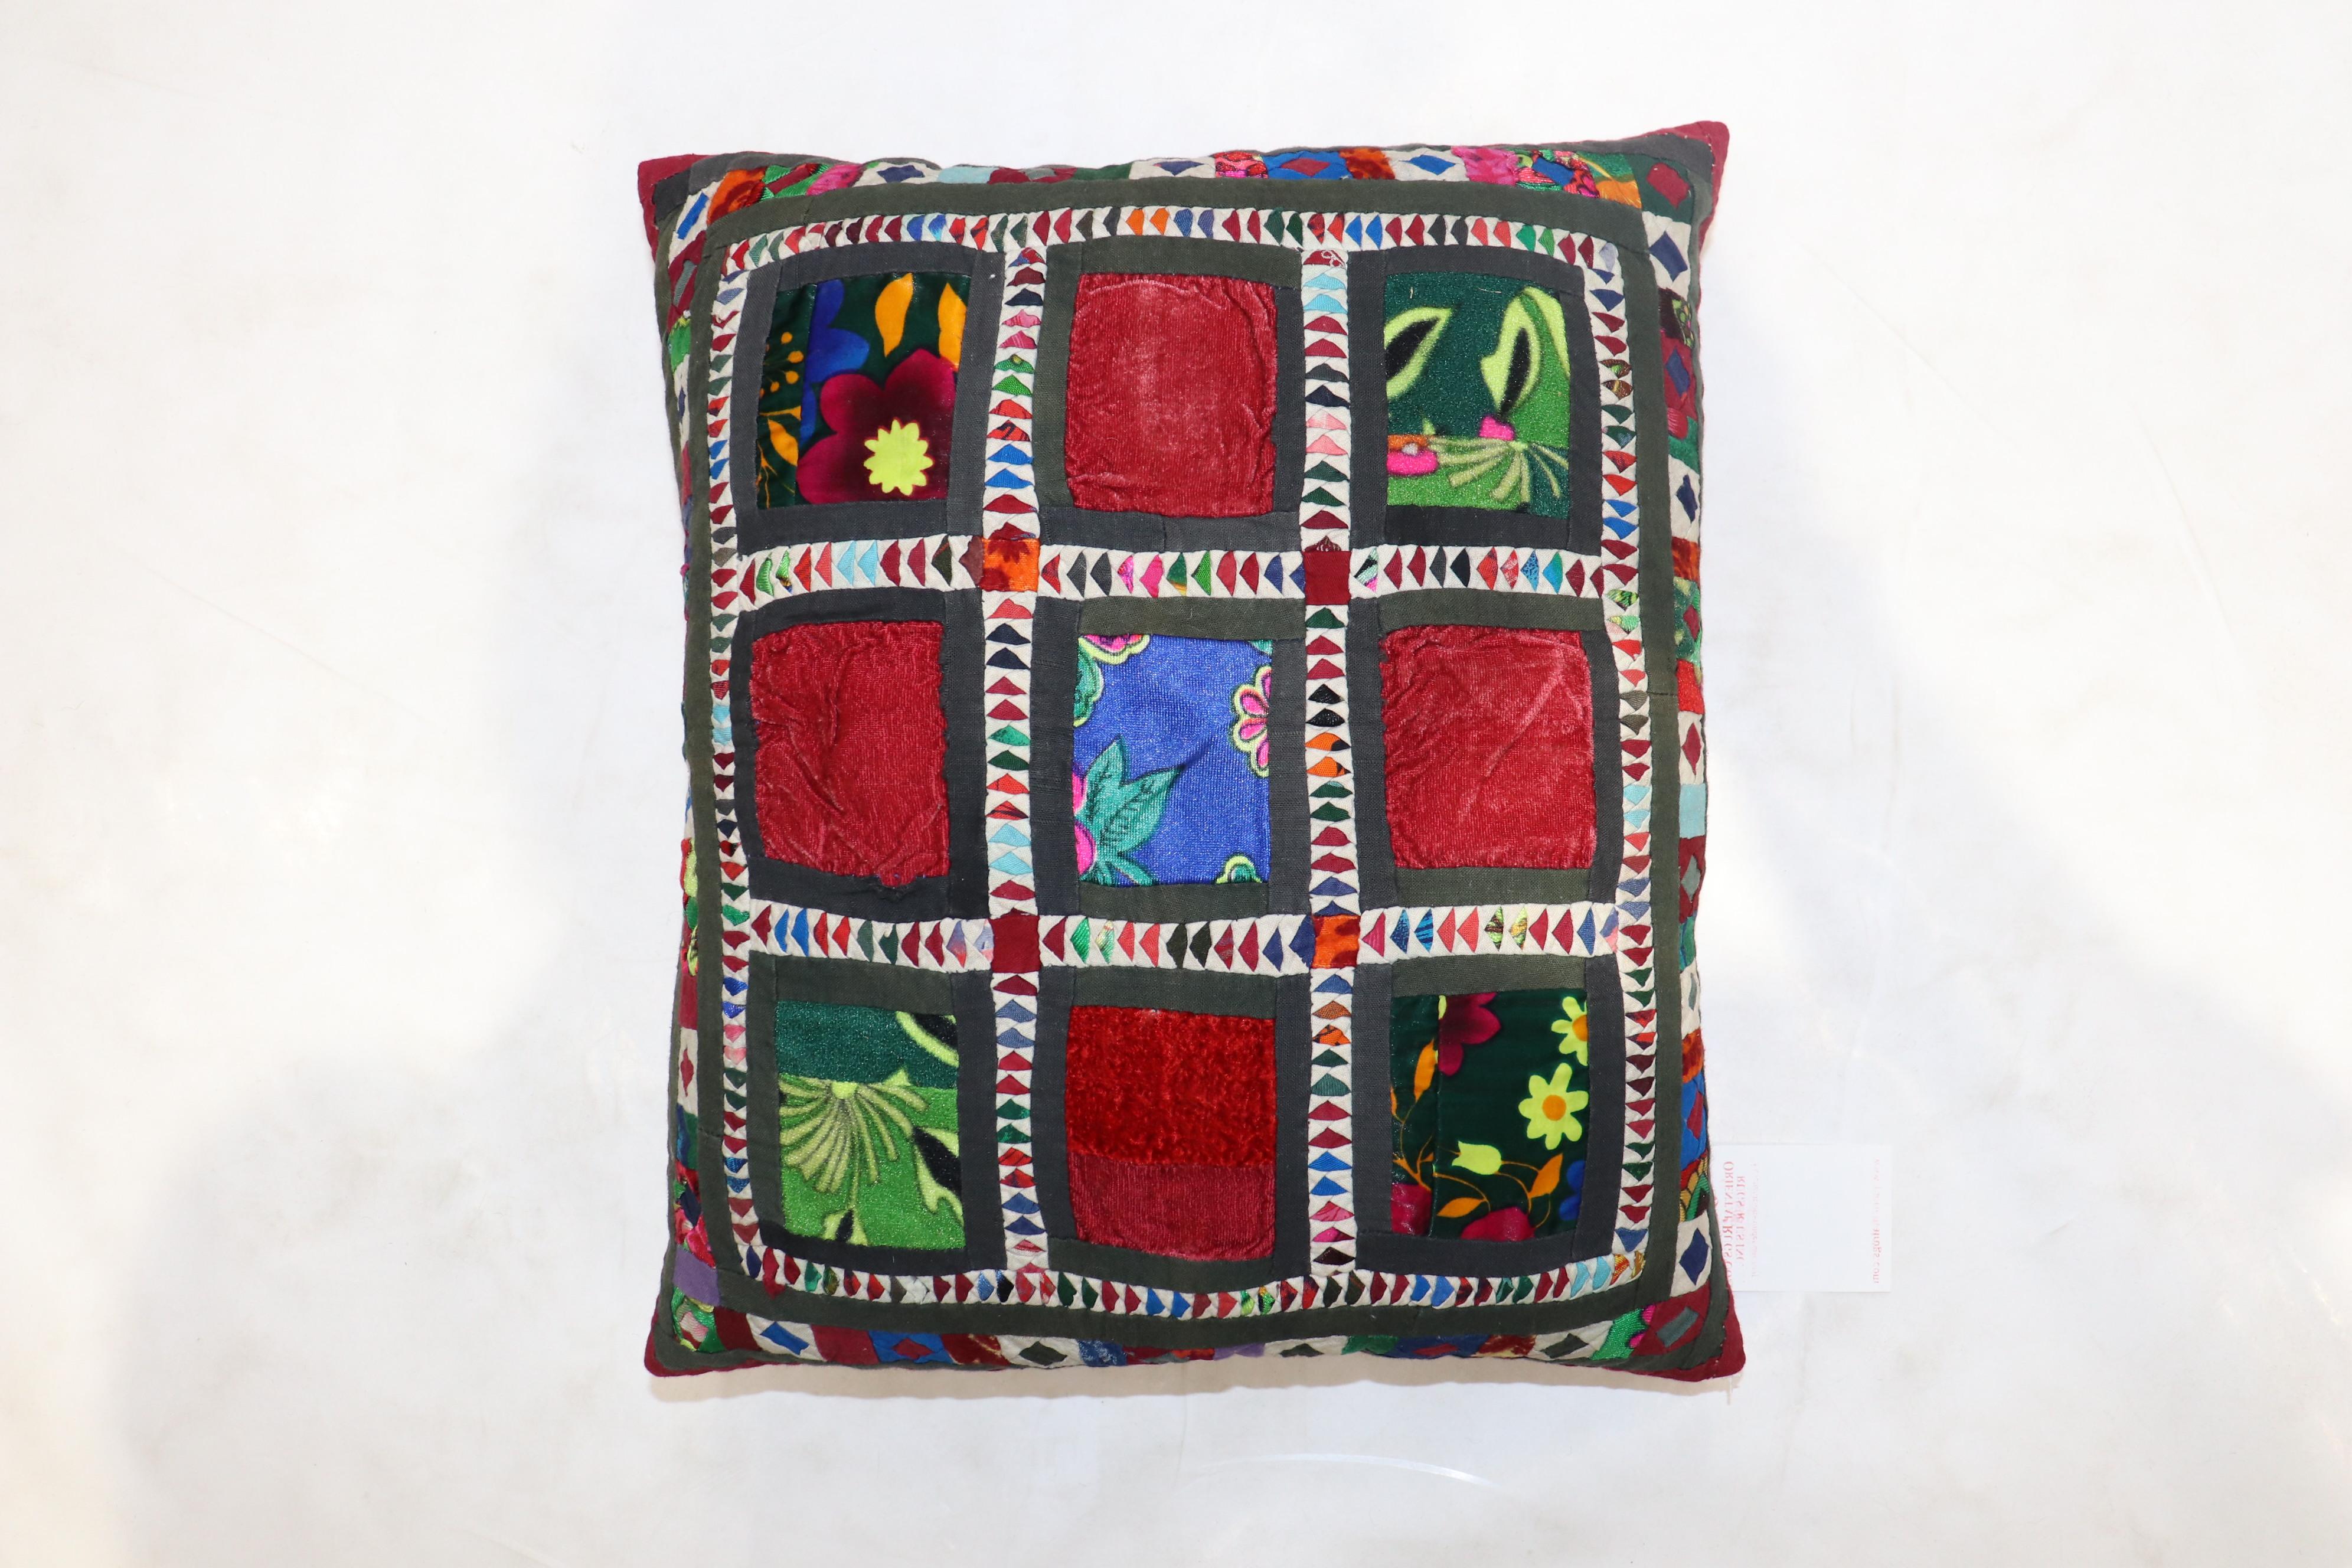 Small square size pillow made from a Suzanni embroidery

Measures: 15